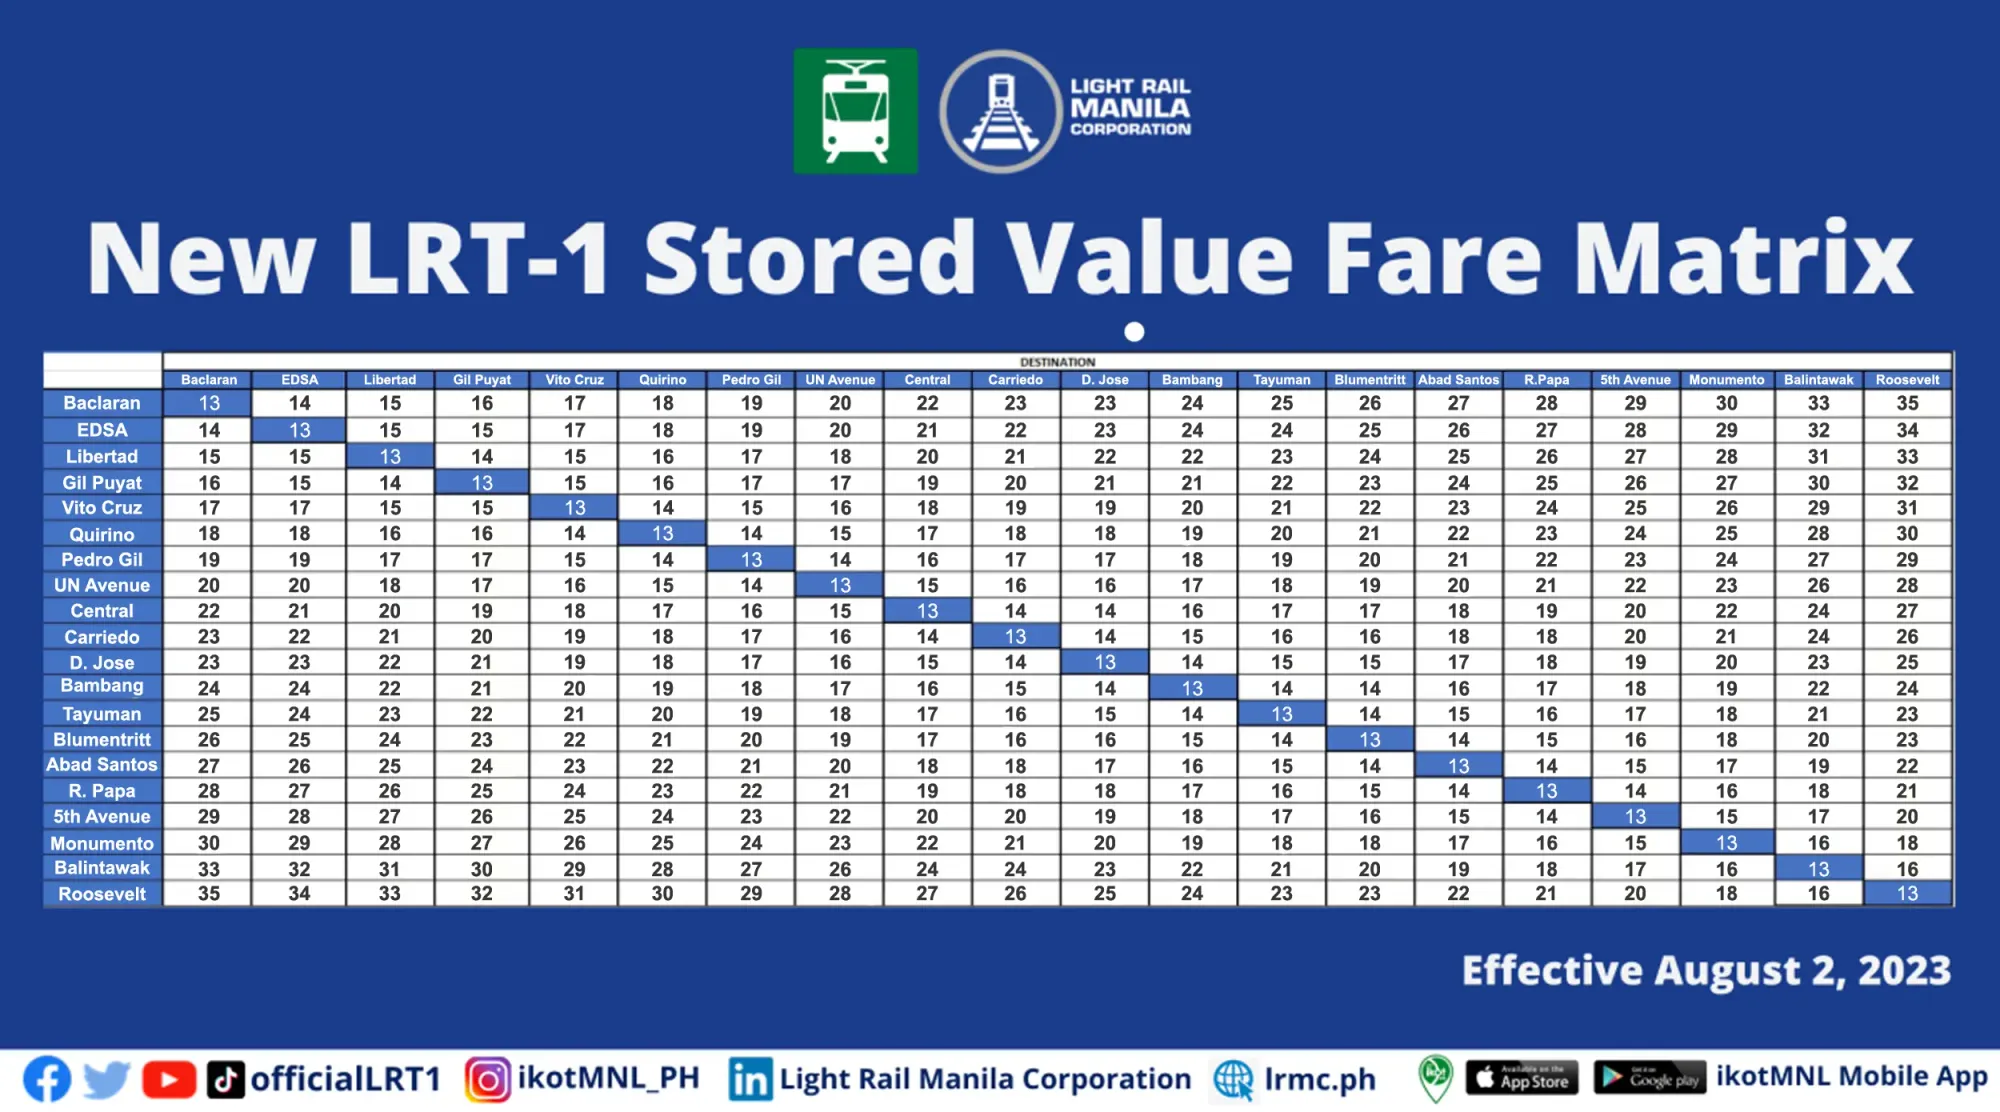 Heads up! Here are the new fares for LRT-1 and LRT-2